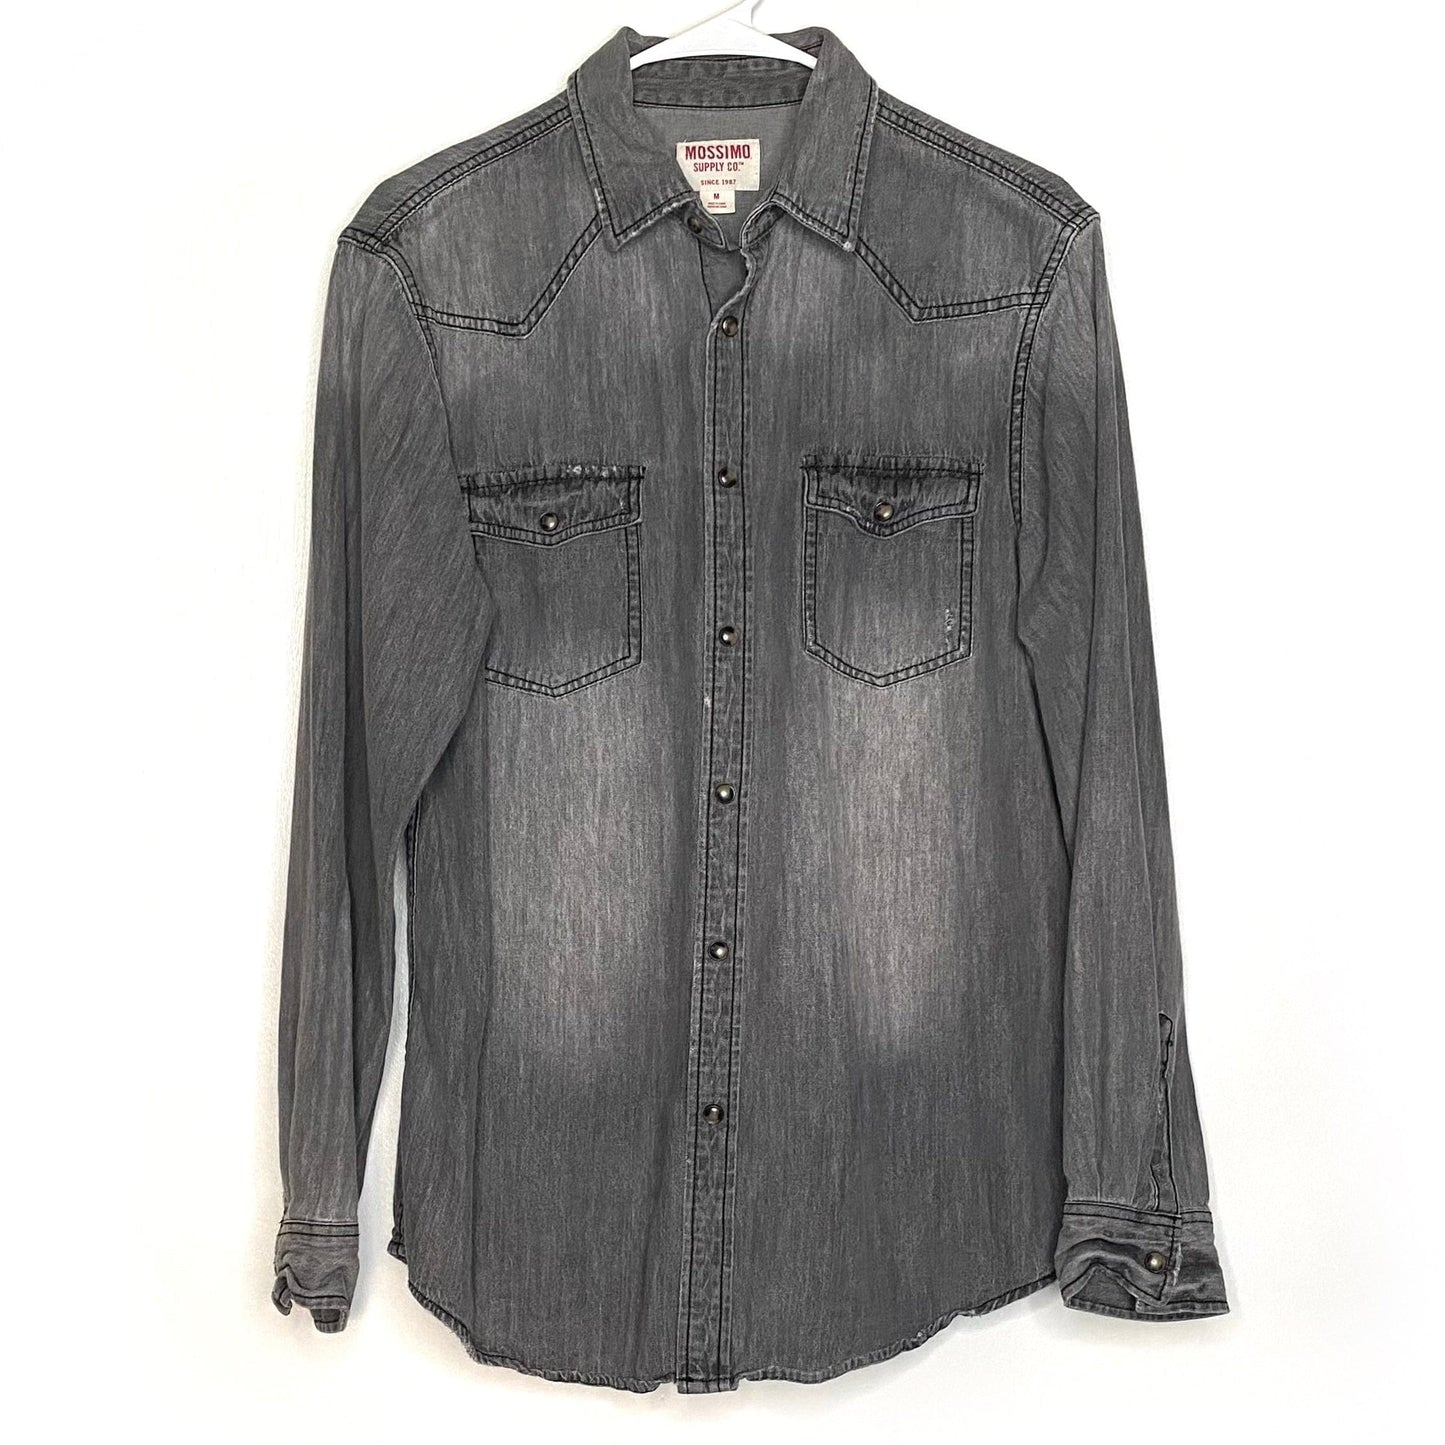 Mossimo Mens Size M Gray Denim Shirt Button-Up L/s Pre-Owned